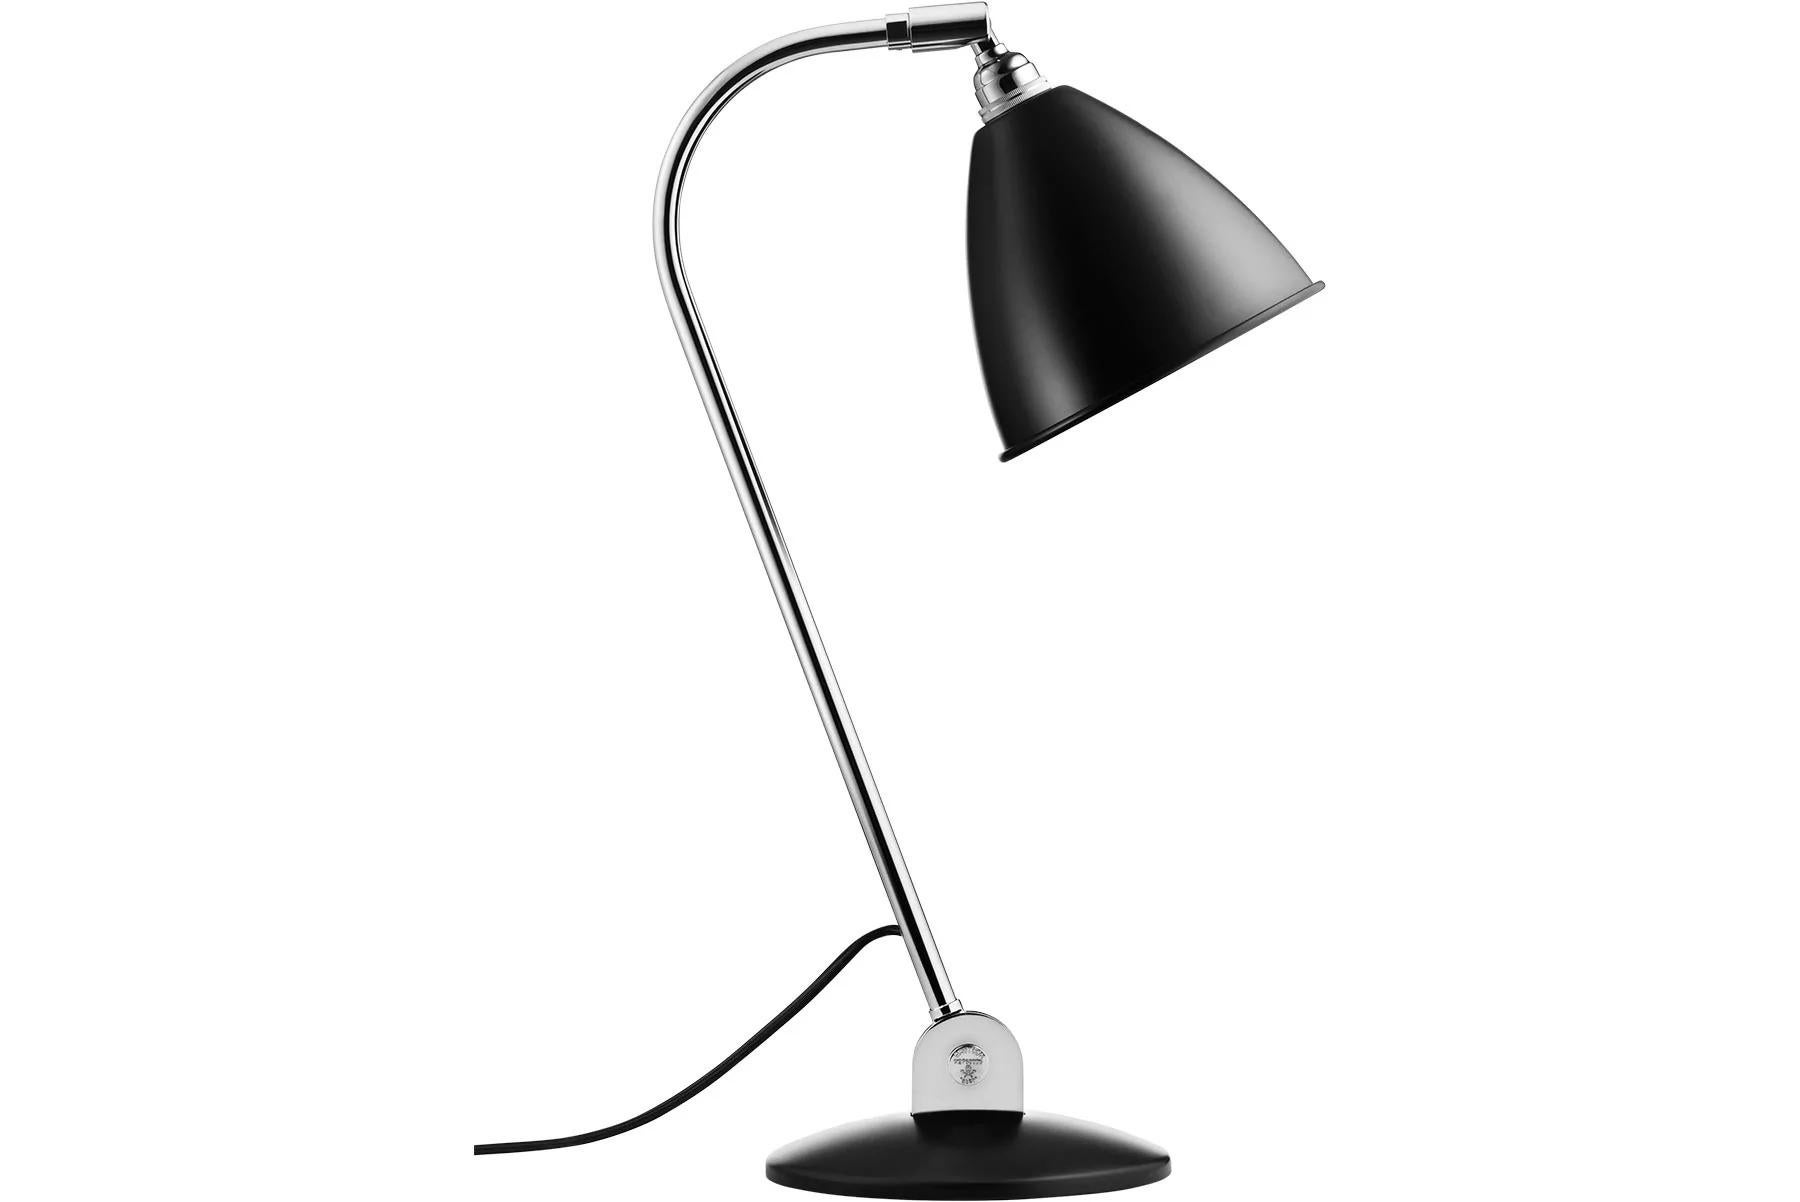 The classic Bestlite BL2 Table Lamp is designed in 1930 by Robert Dudley Best, a British designer highly influenced by the school of Bauhaus. With its clean lines and elegant expression, the Bestlite BL2 Table Lamp exudes a unique simplicity with